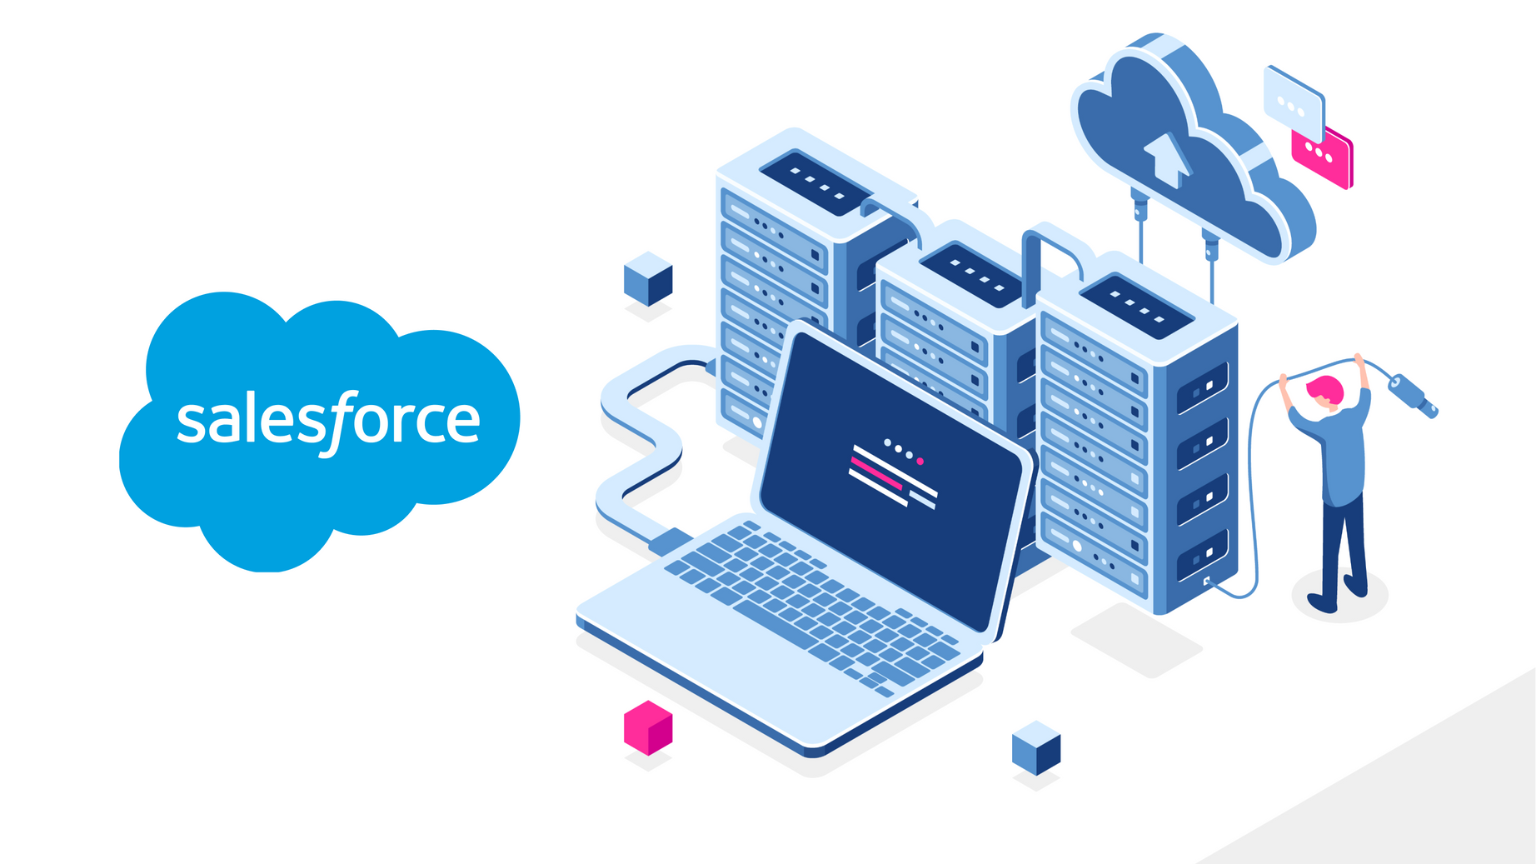 Why Choose Salesforce for Your Business?